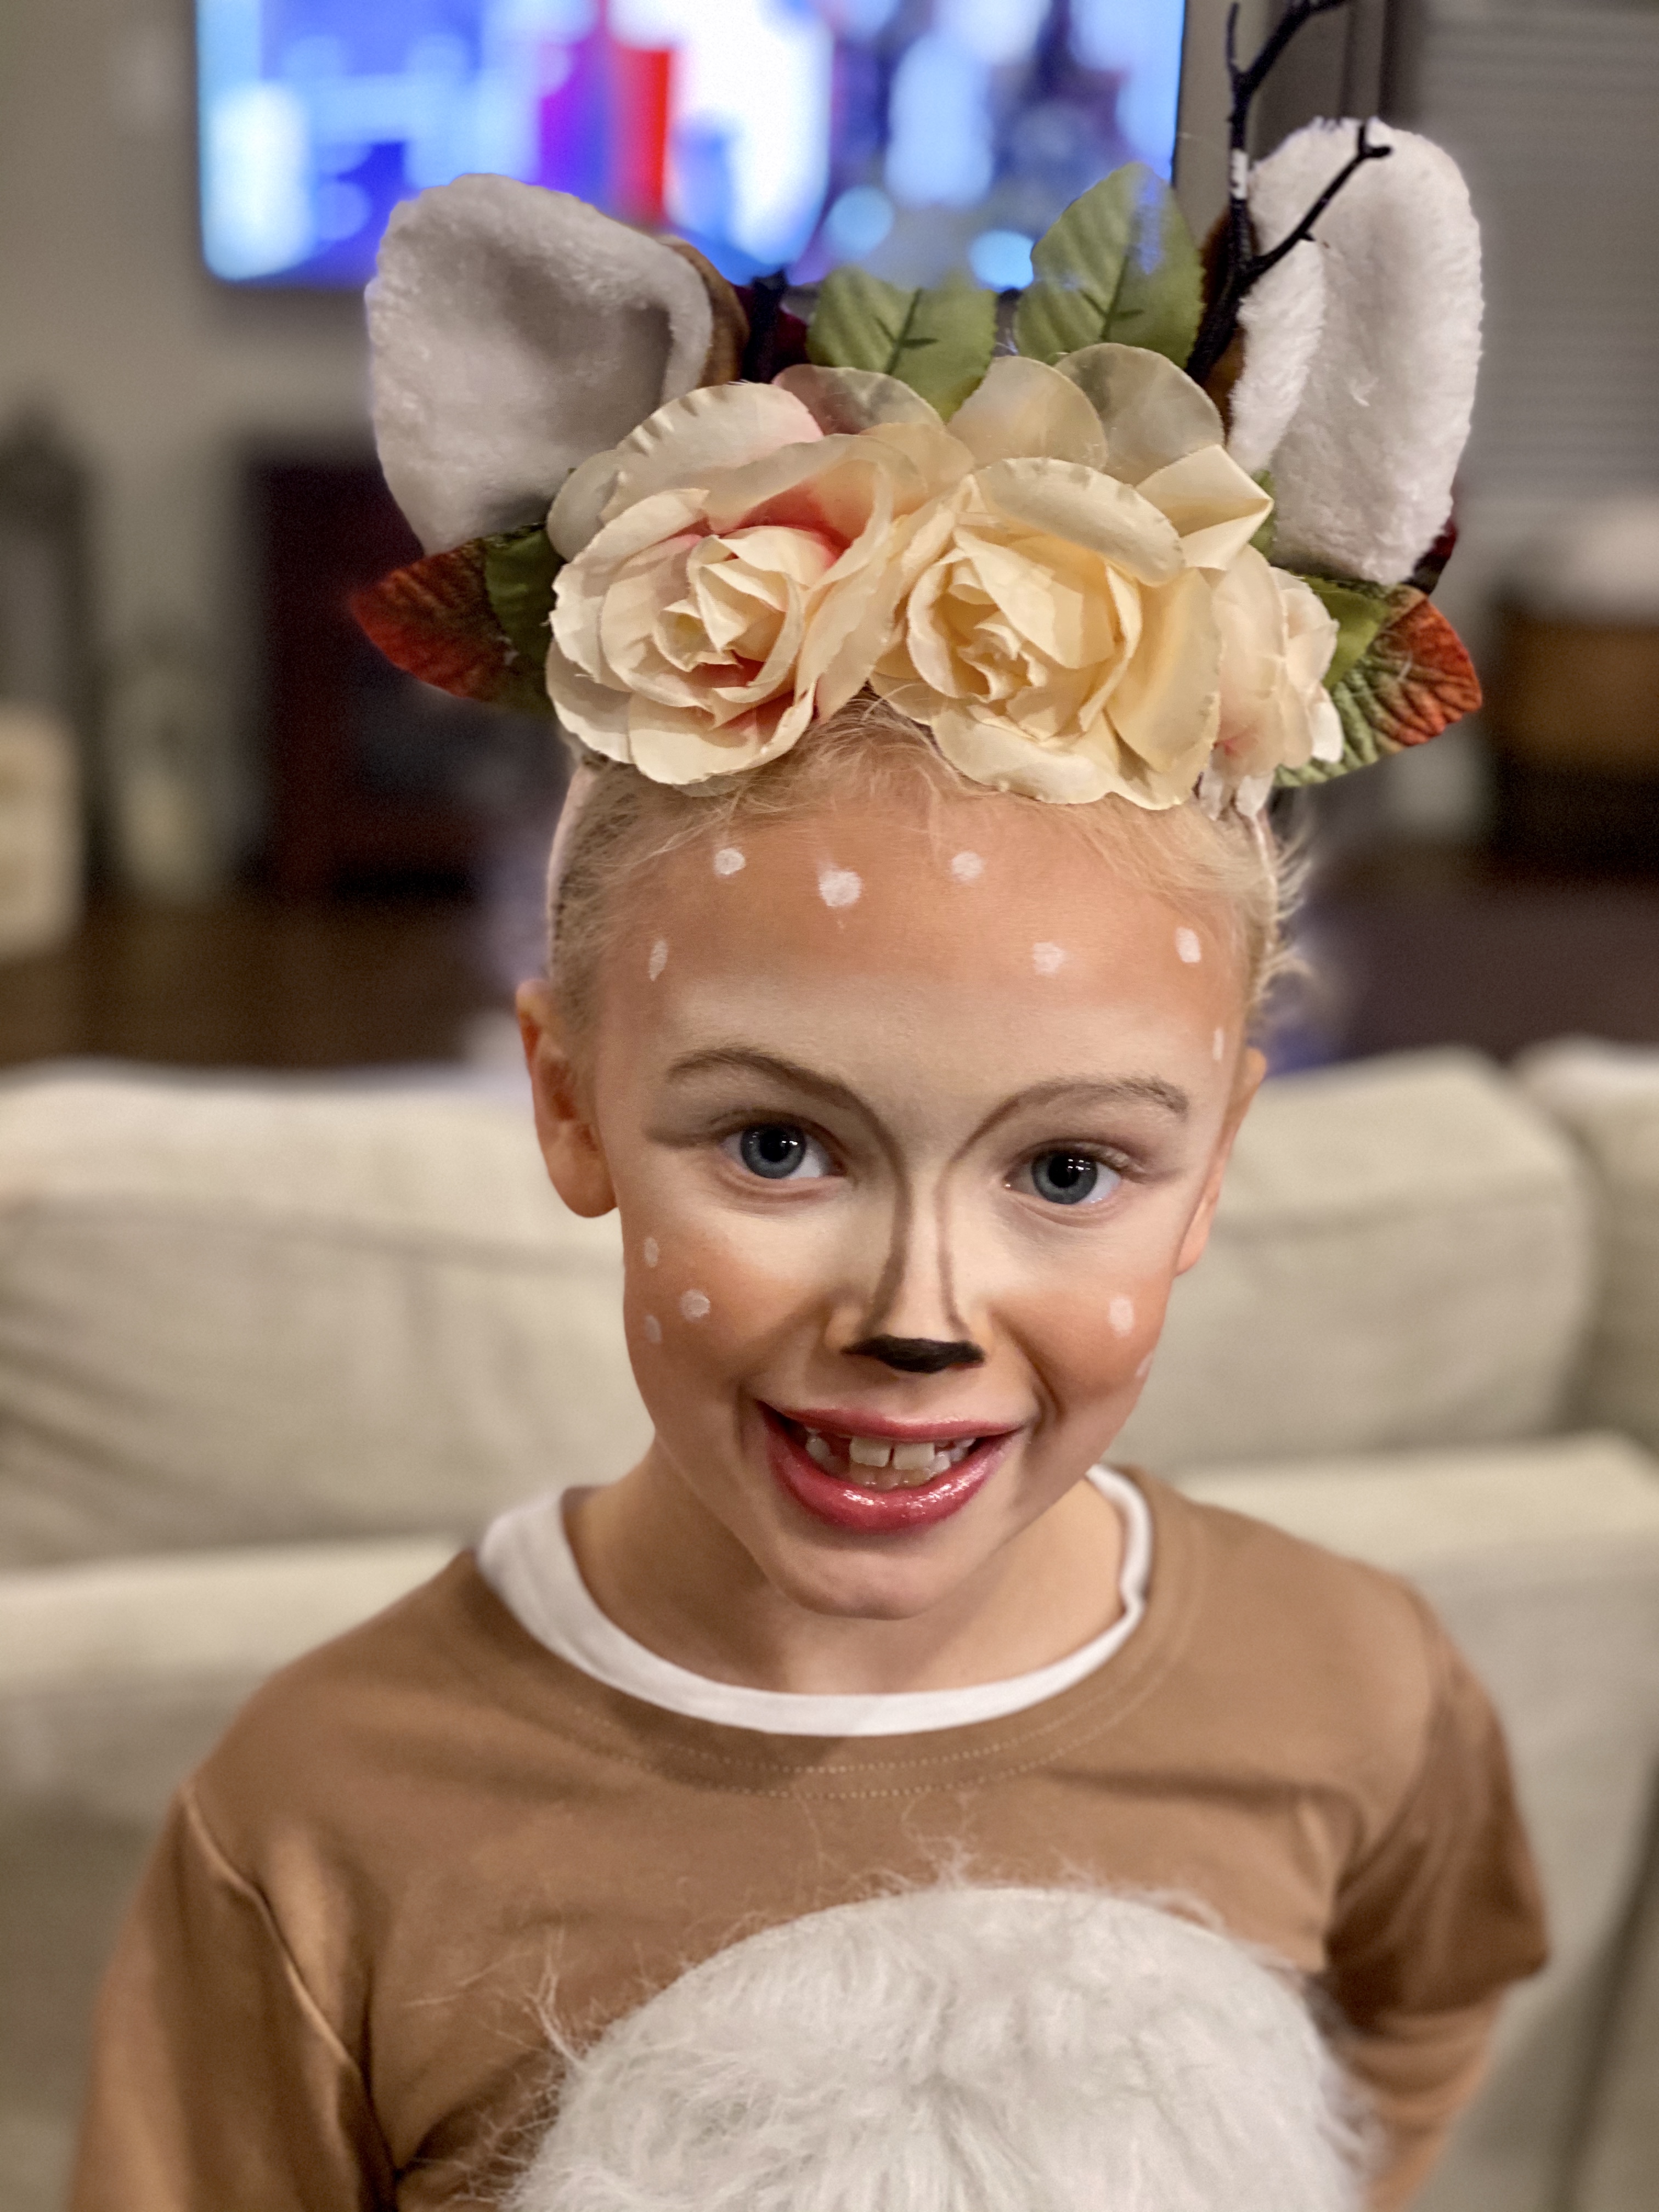 Your Halloween Costumes 2019 – NBC 5 Dallas-Fort Worth